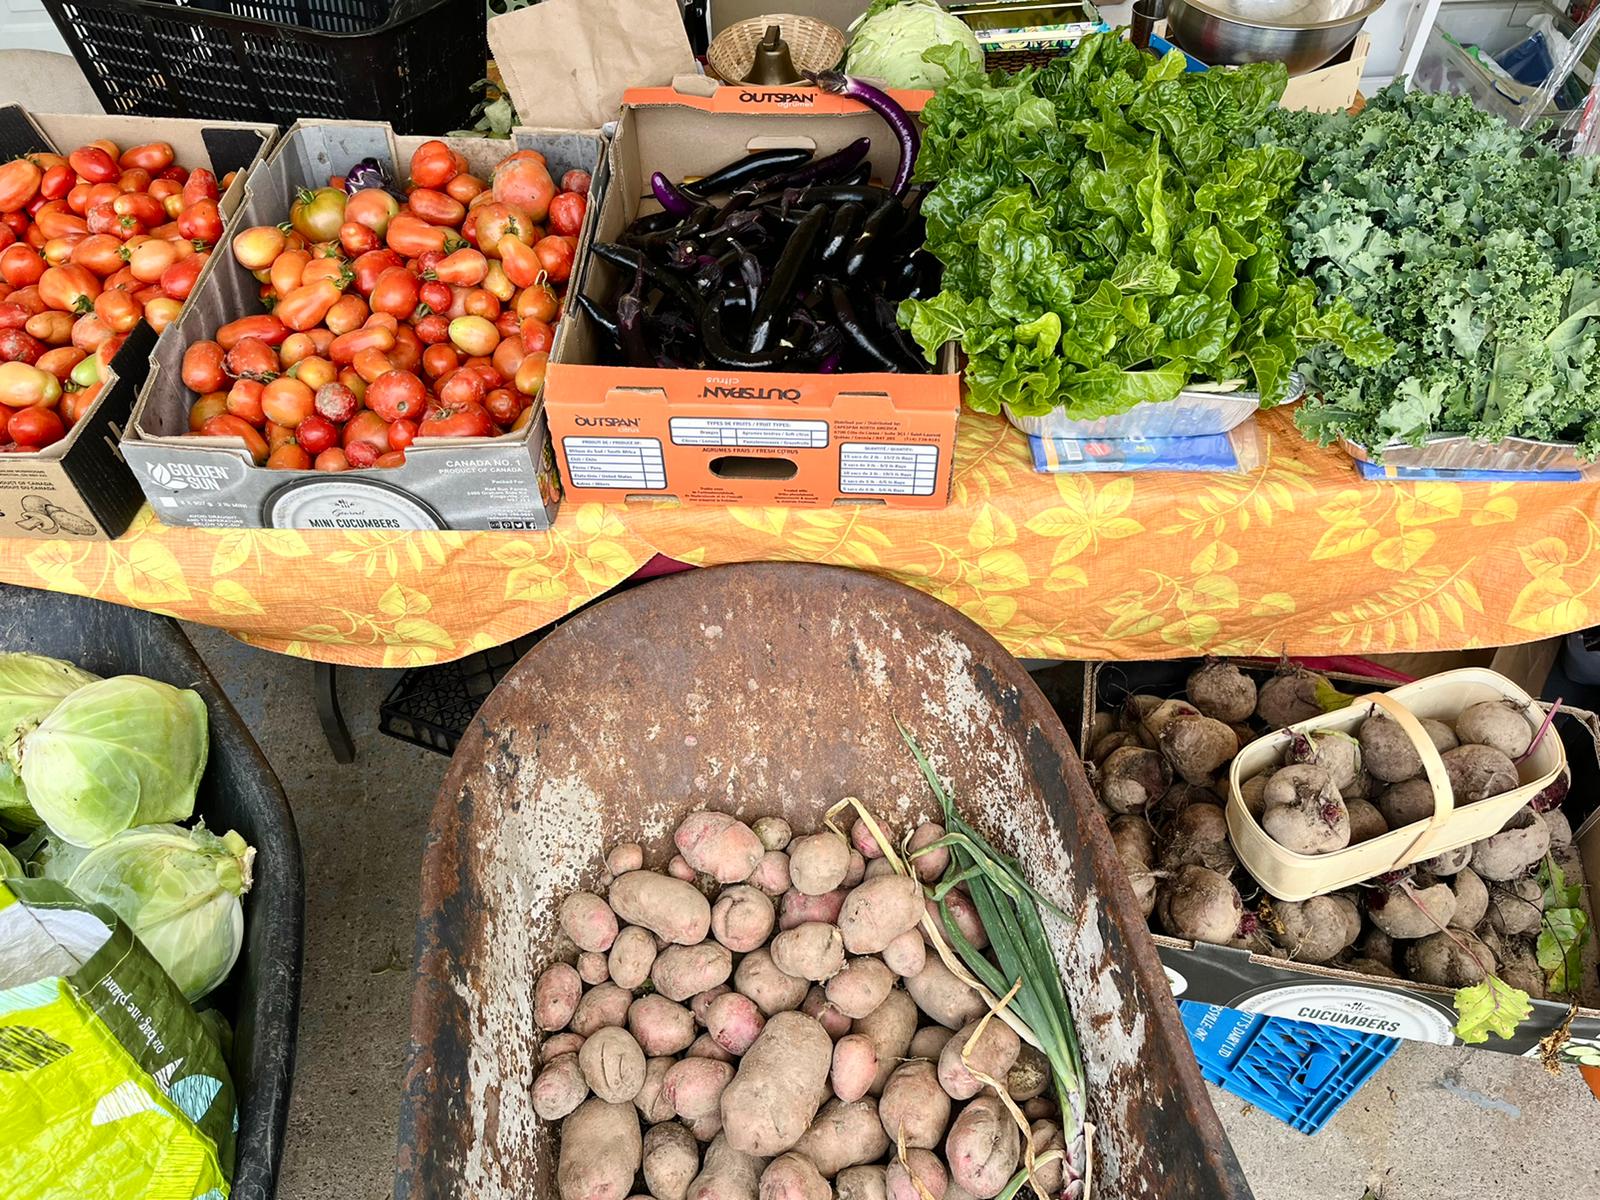 Farm stand with tomatoes, eggplant, beets, potatoes, cabbage and kale for sale